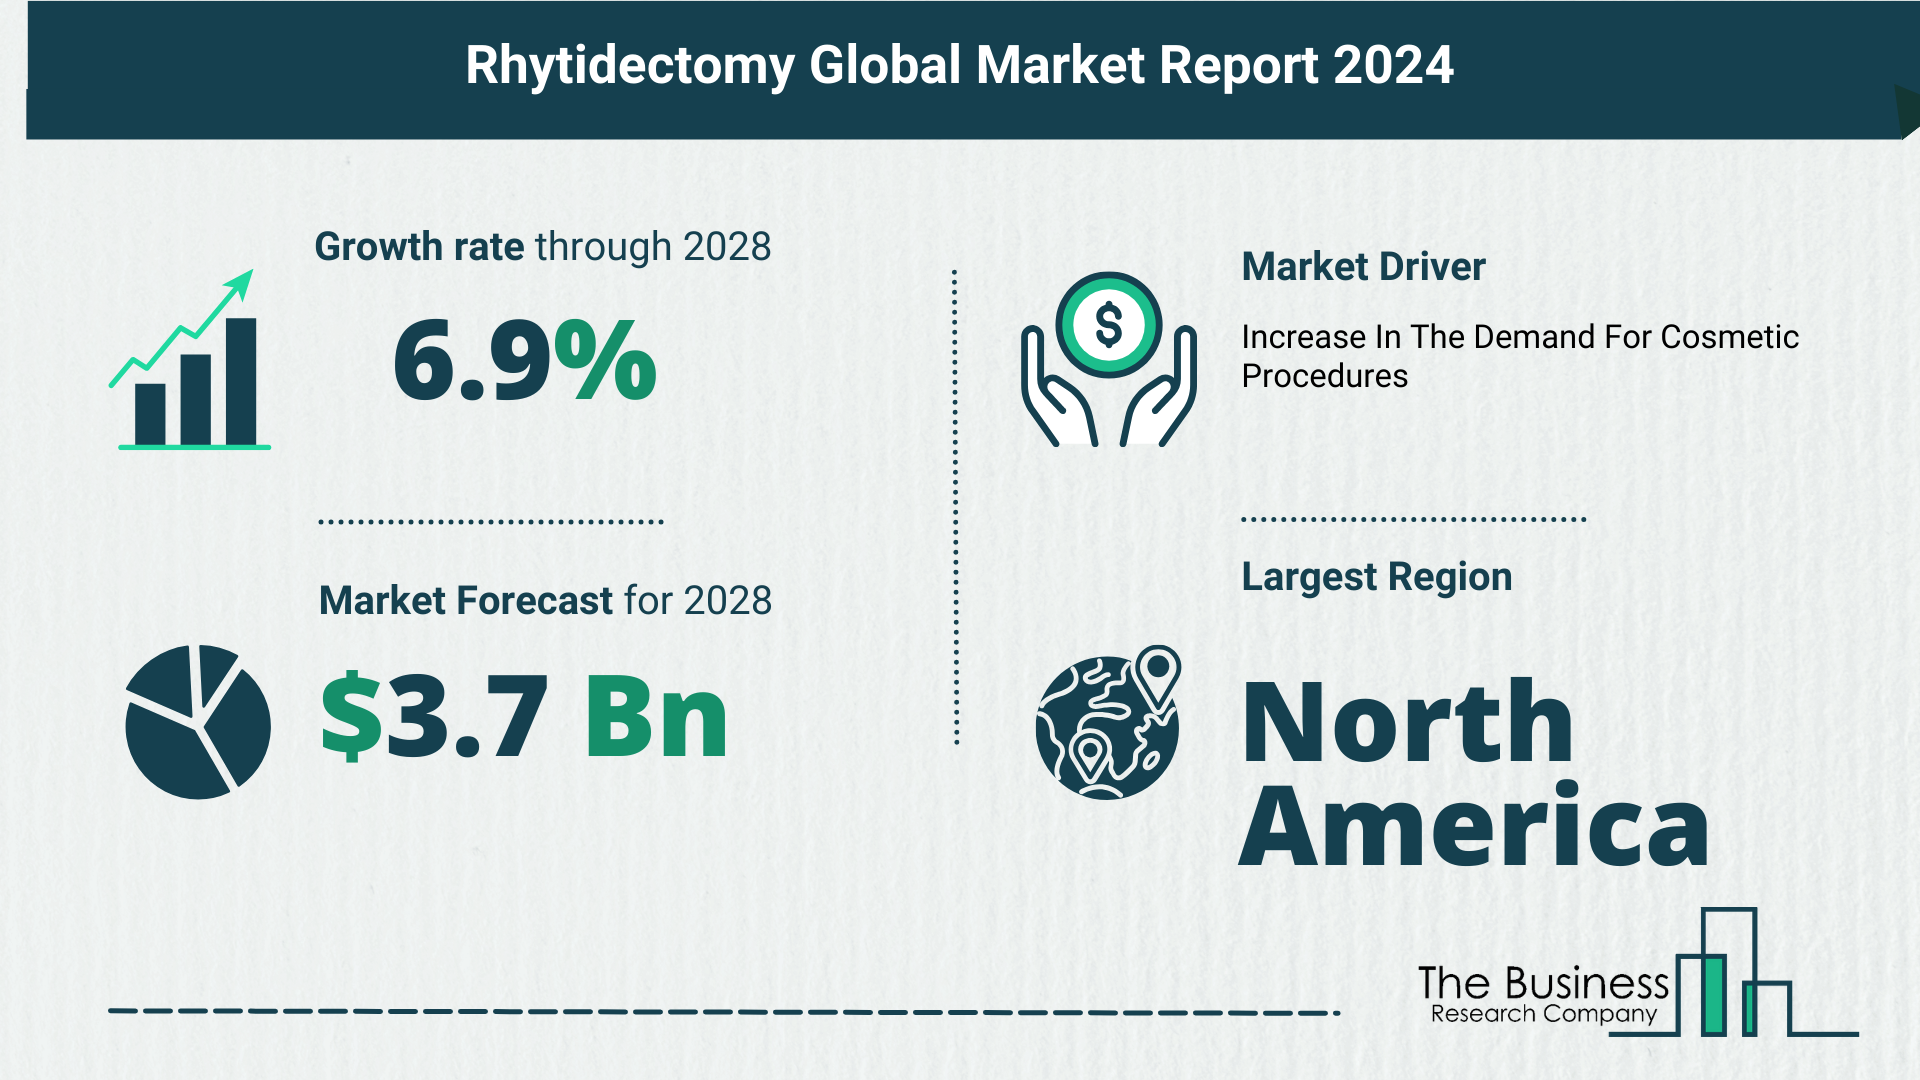 Global Rhytidectomy Market Overview 2024: Size, Drivers, And Trends